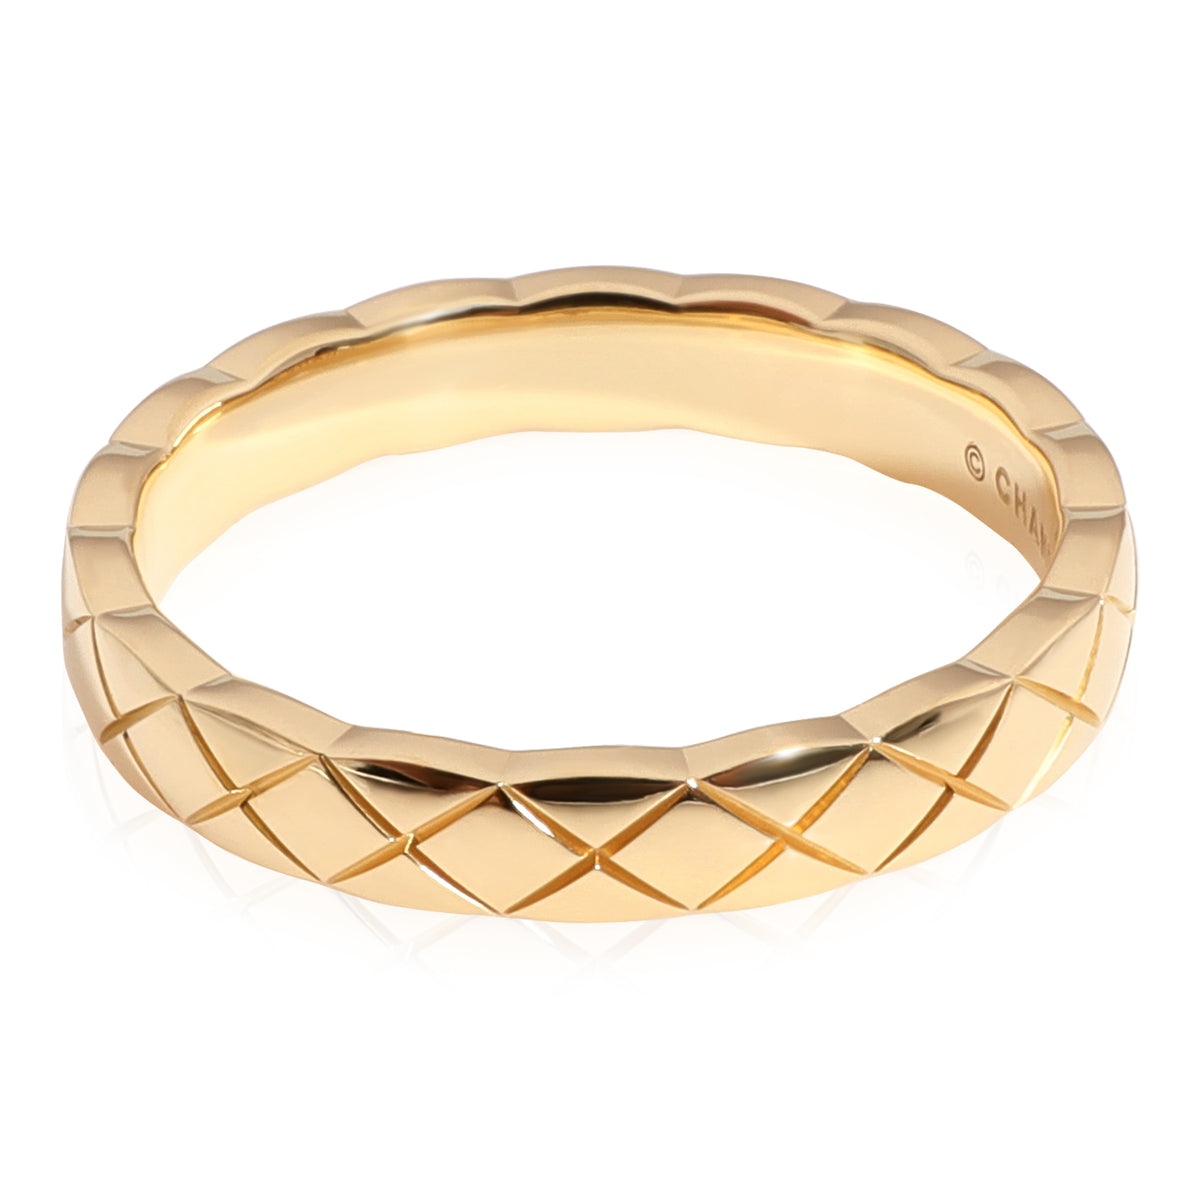 Chanel Coco Crush Ring in 18k Yellow Gold